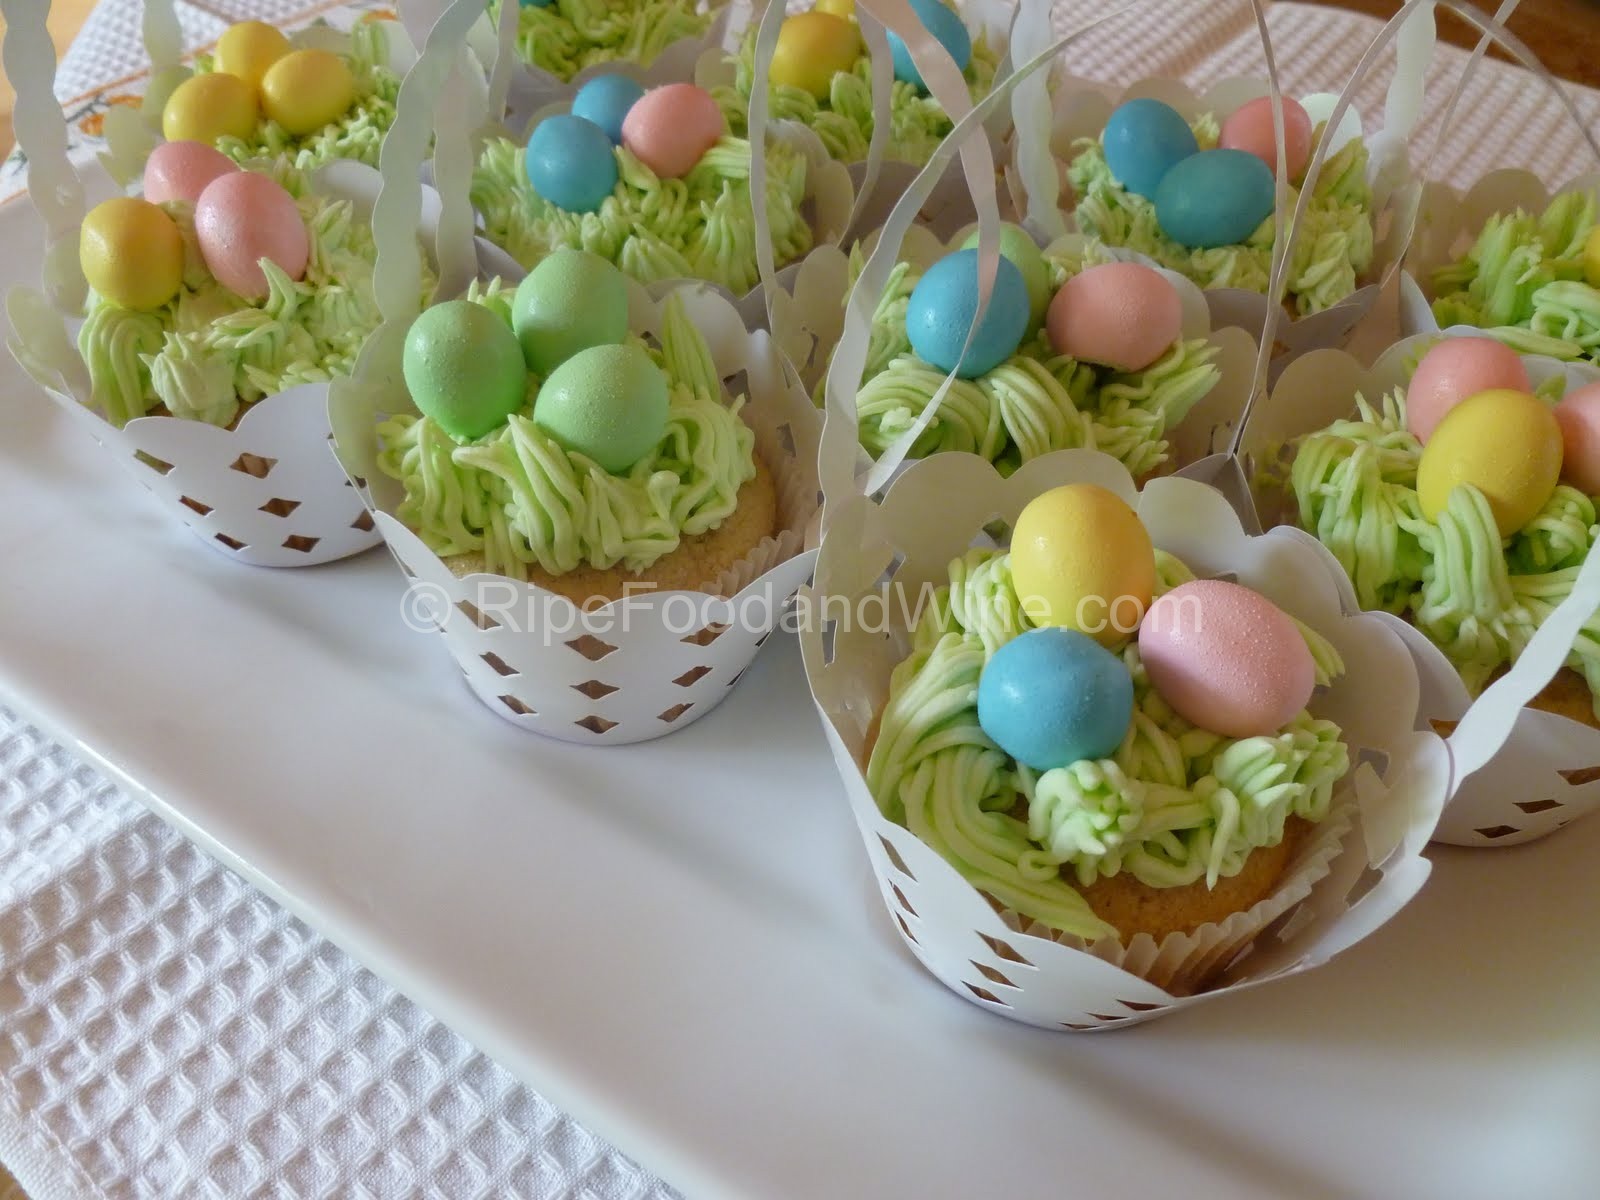 Meringue Buttercream and Happy Easter!